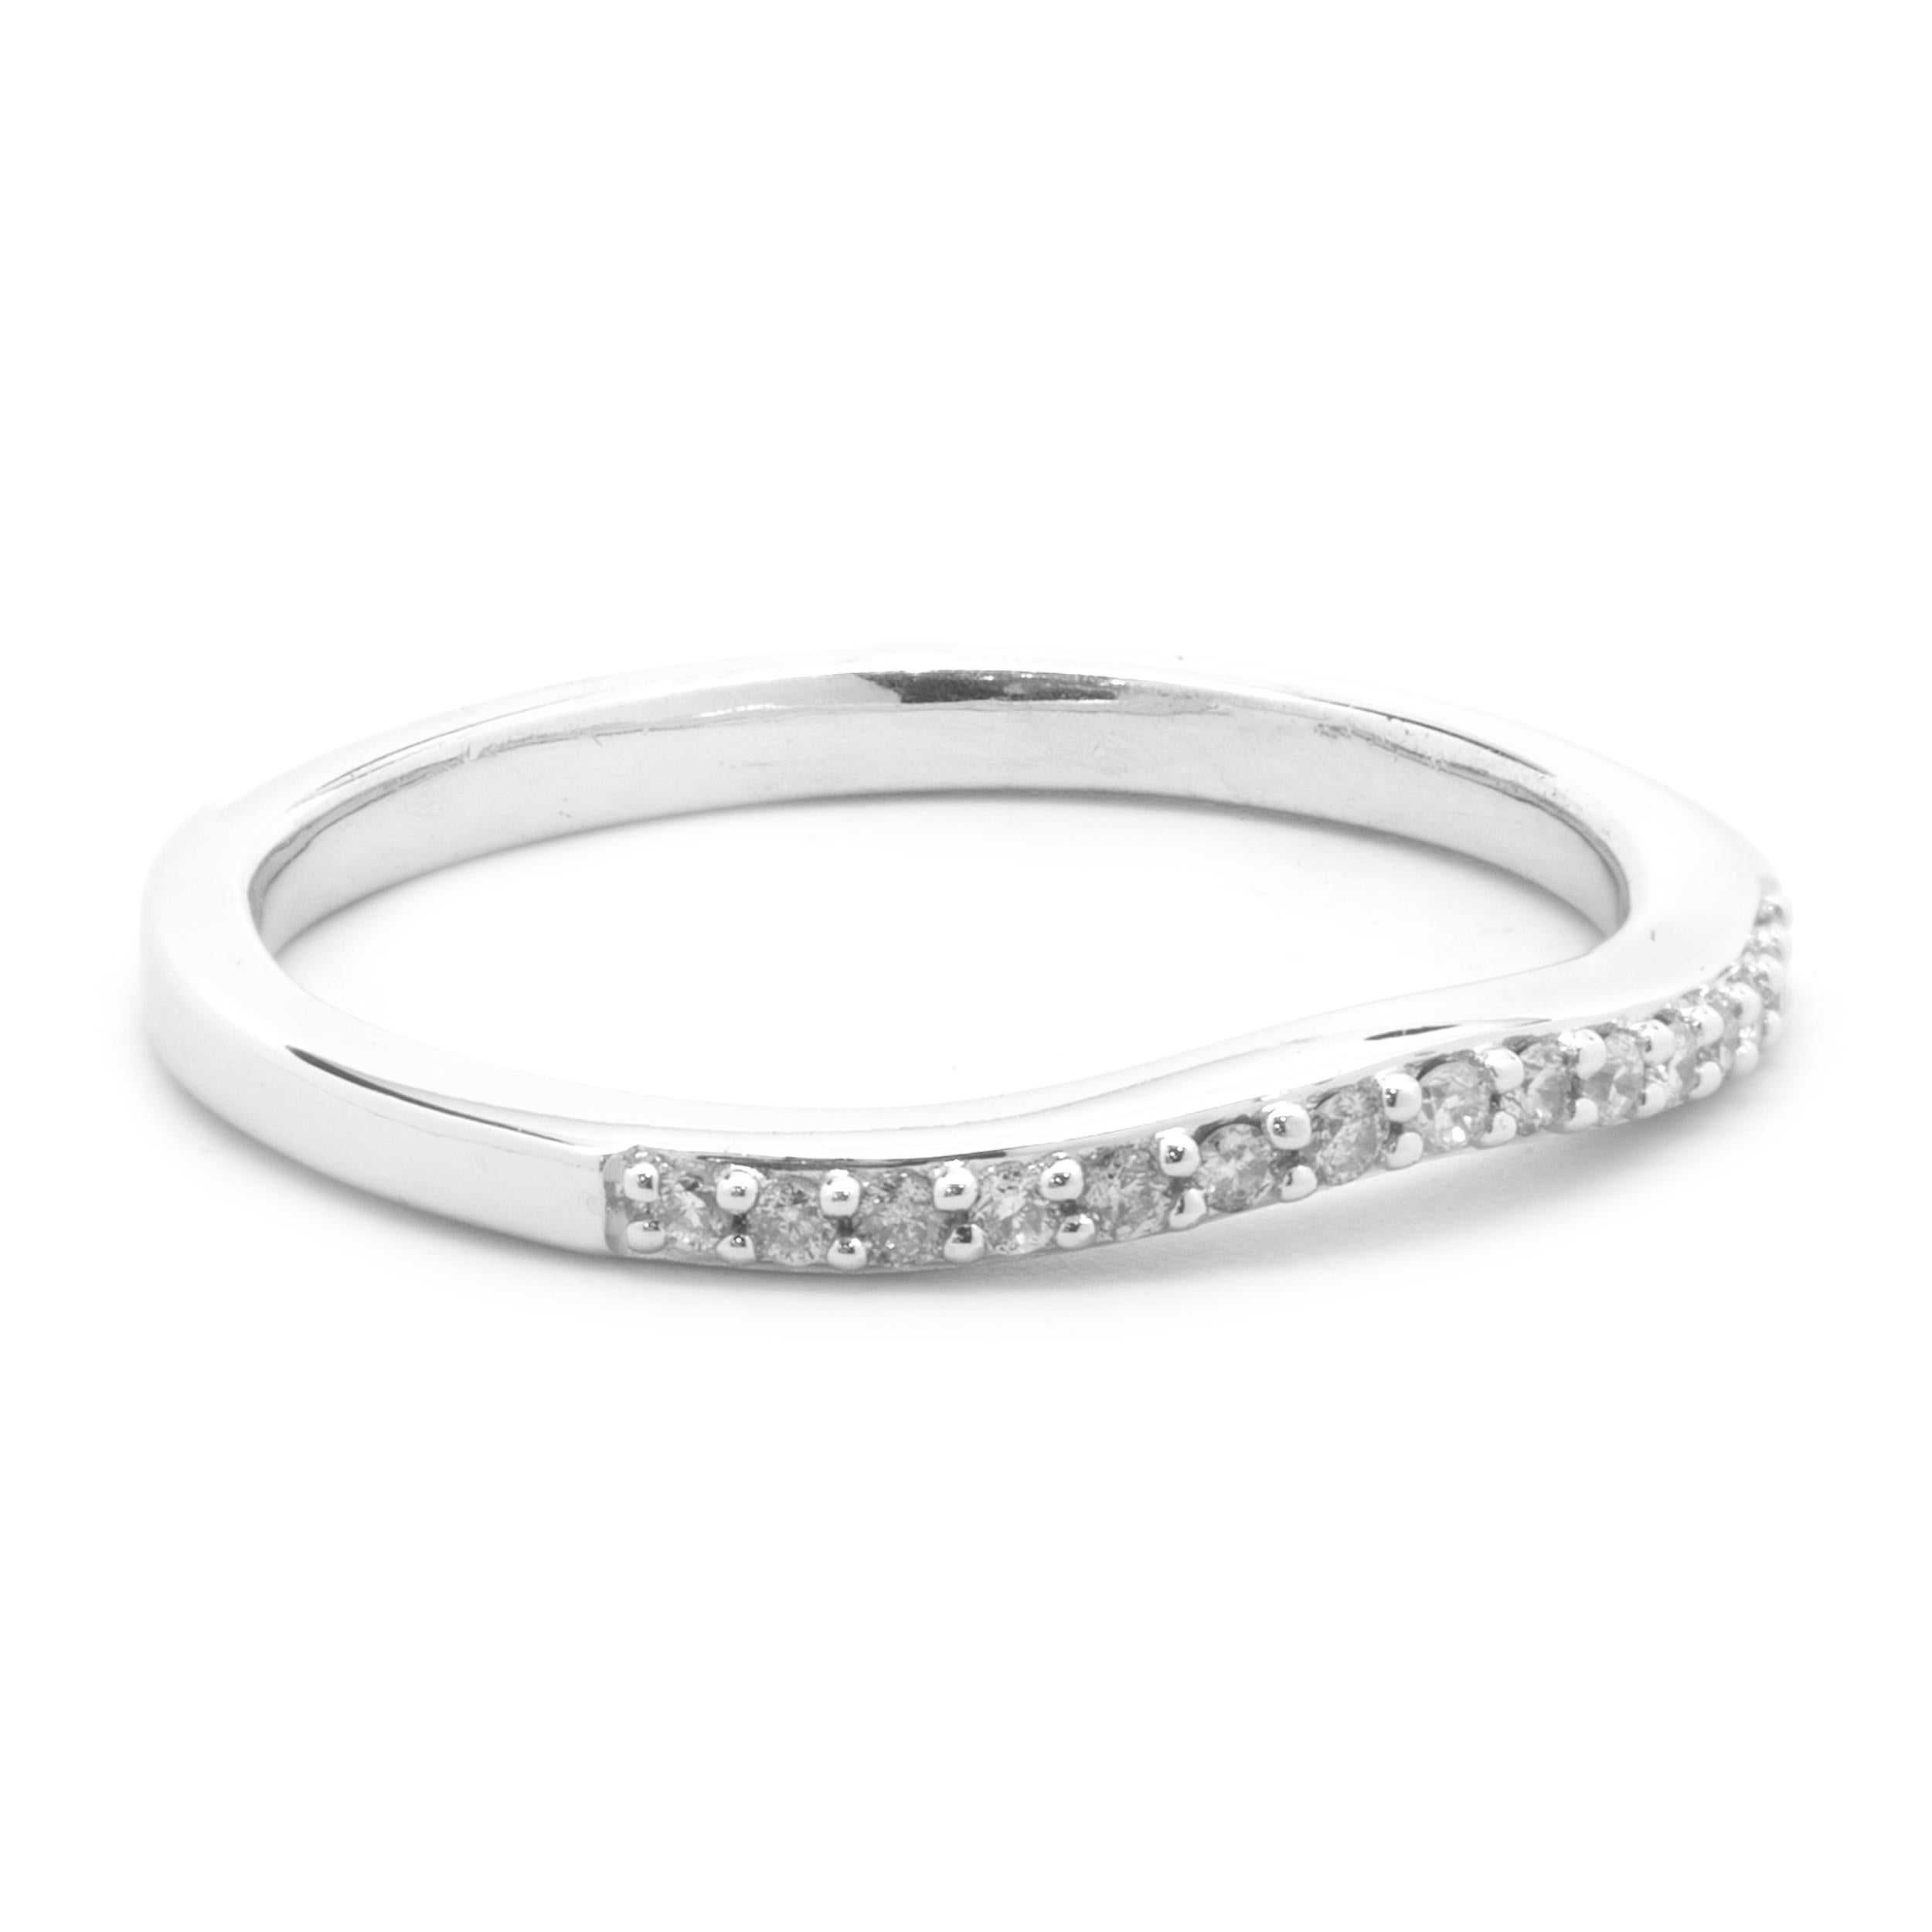 Designer: Custom
Material: 14K white gold
Diamonds: 16 round cut = .16cttw
Color: H
Clarity: SI2
Size: 7 (please allow for two additional days for complimentary sizing)
Dimensions: ring measures 2mm in width
Weight: 1.99 grams
